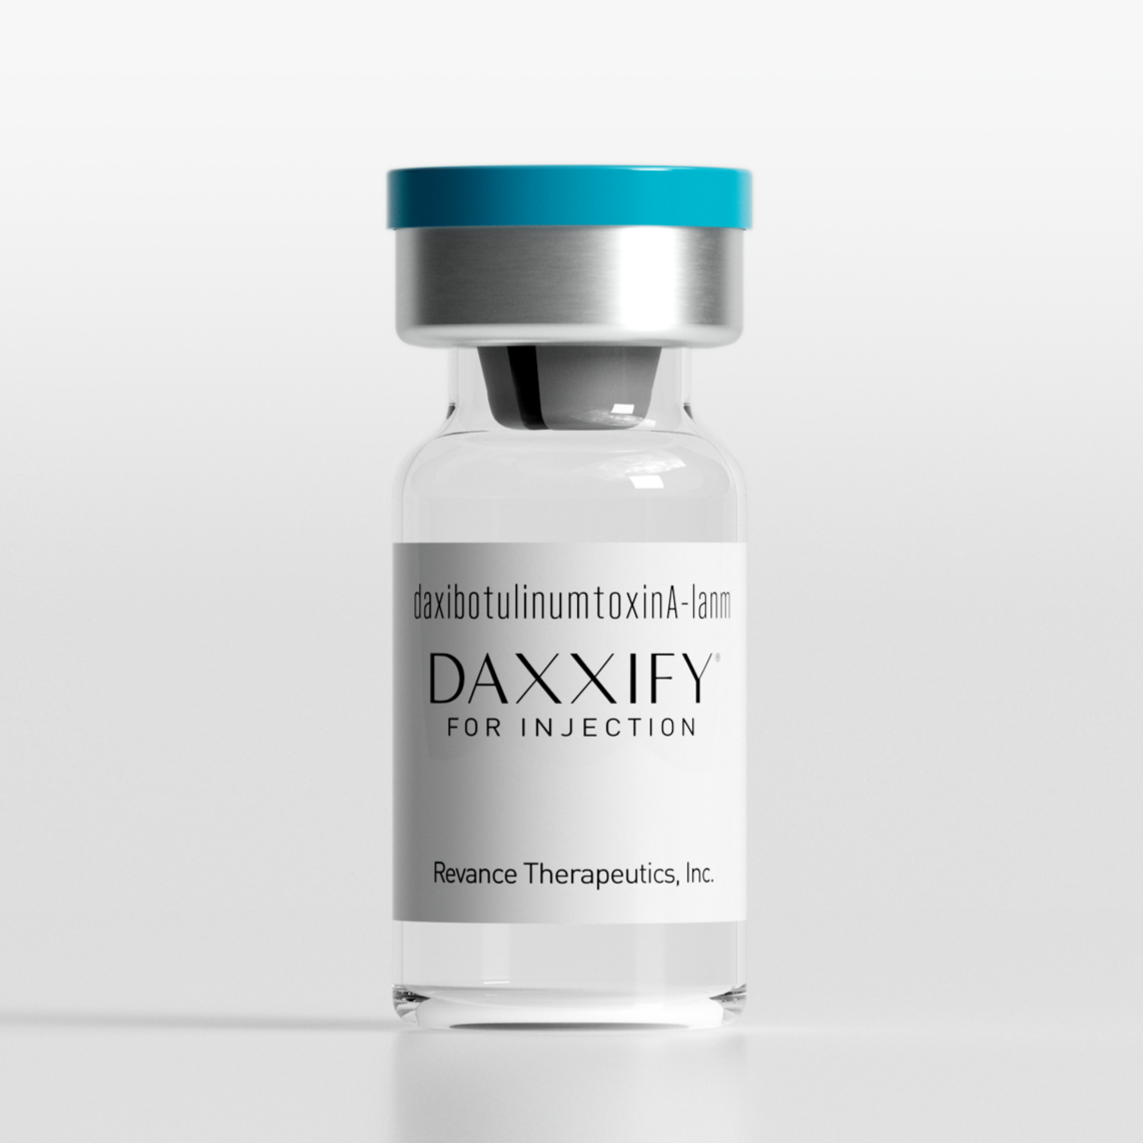 Daxxify® Vial